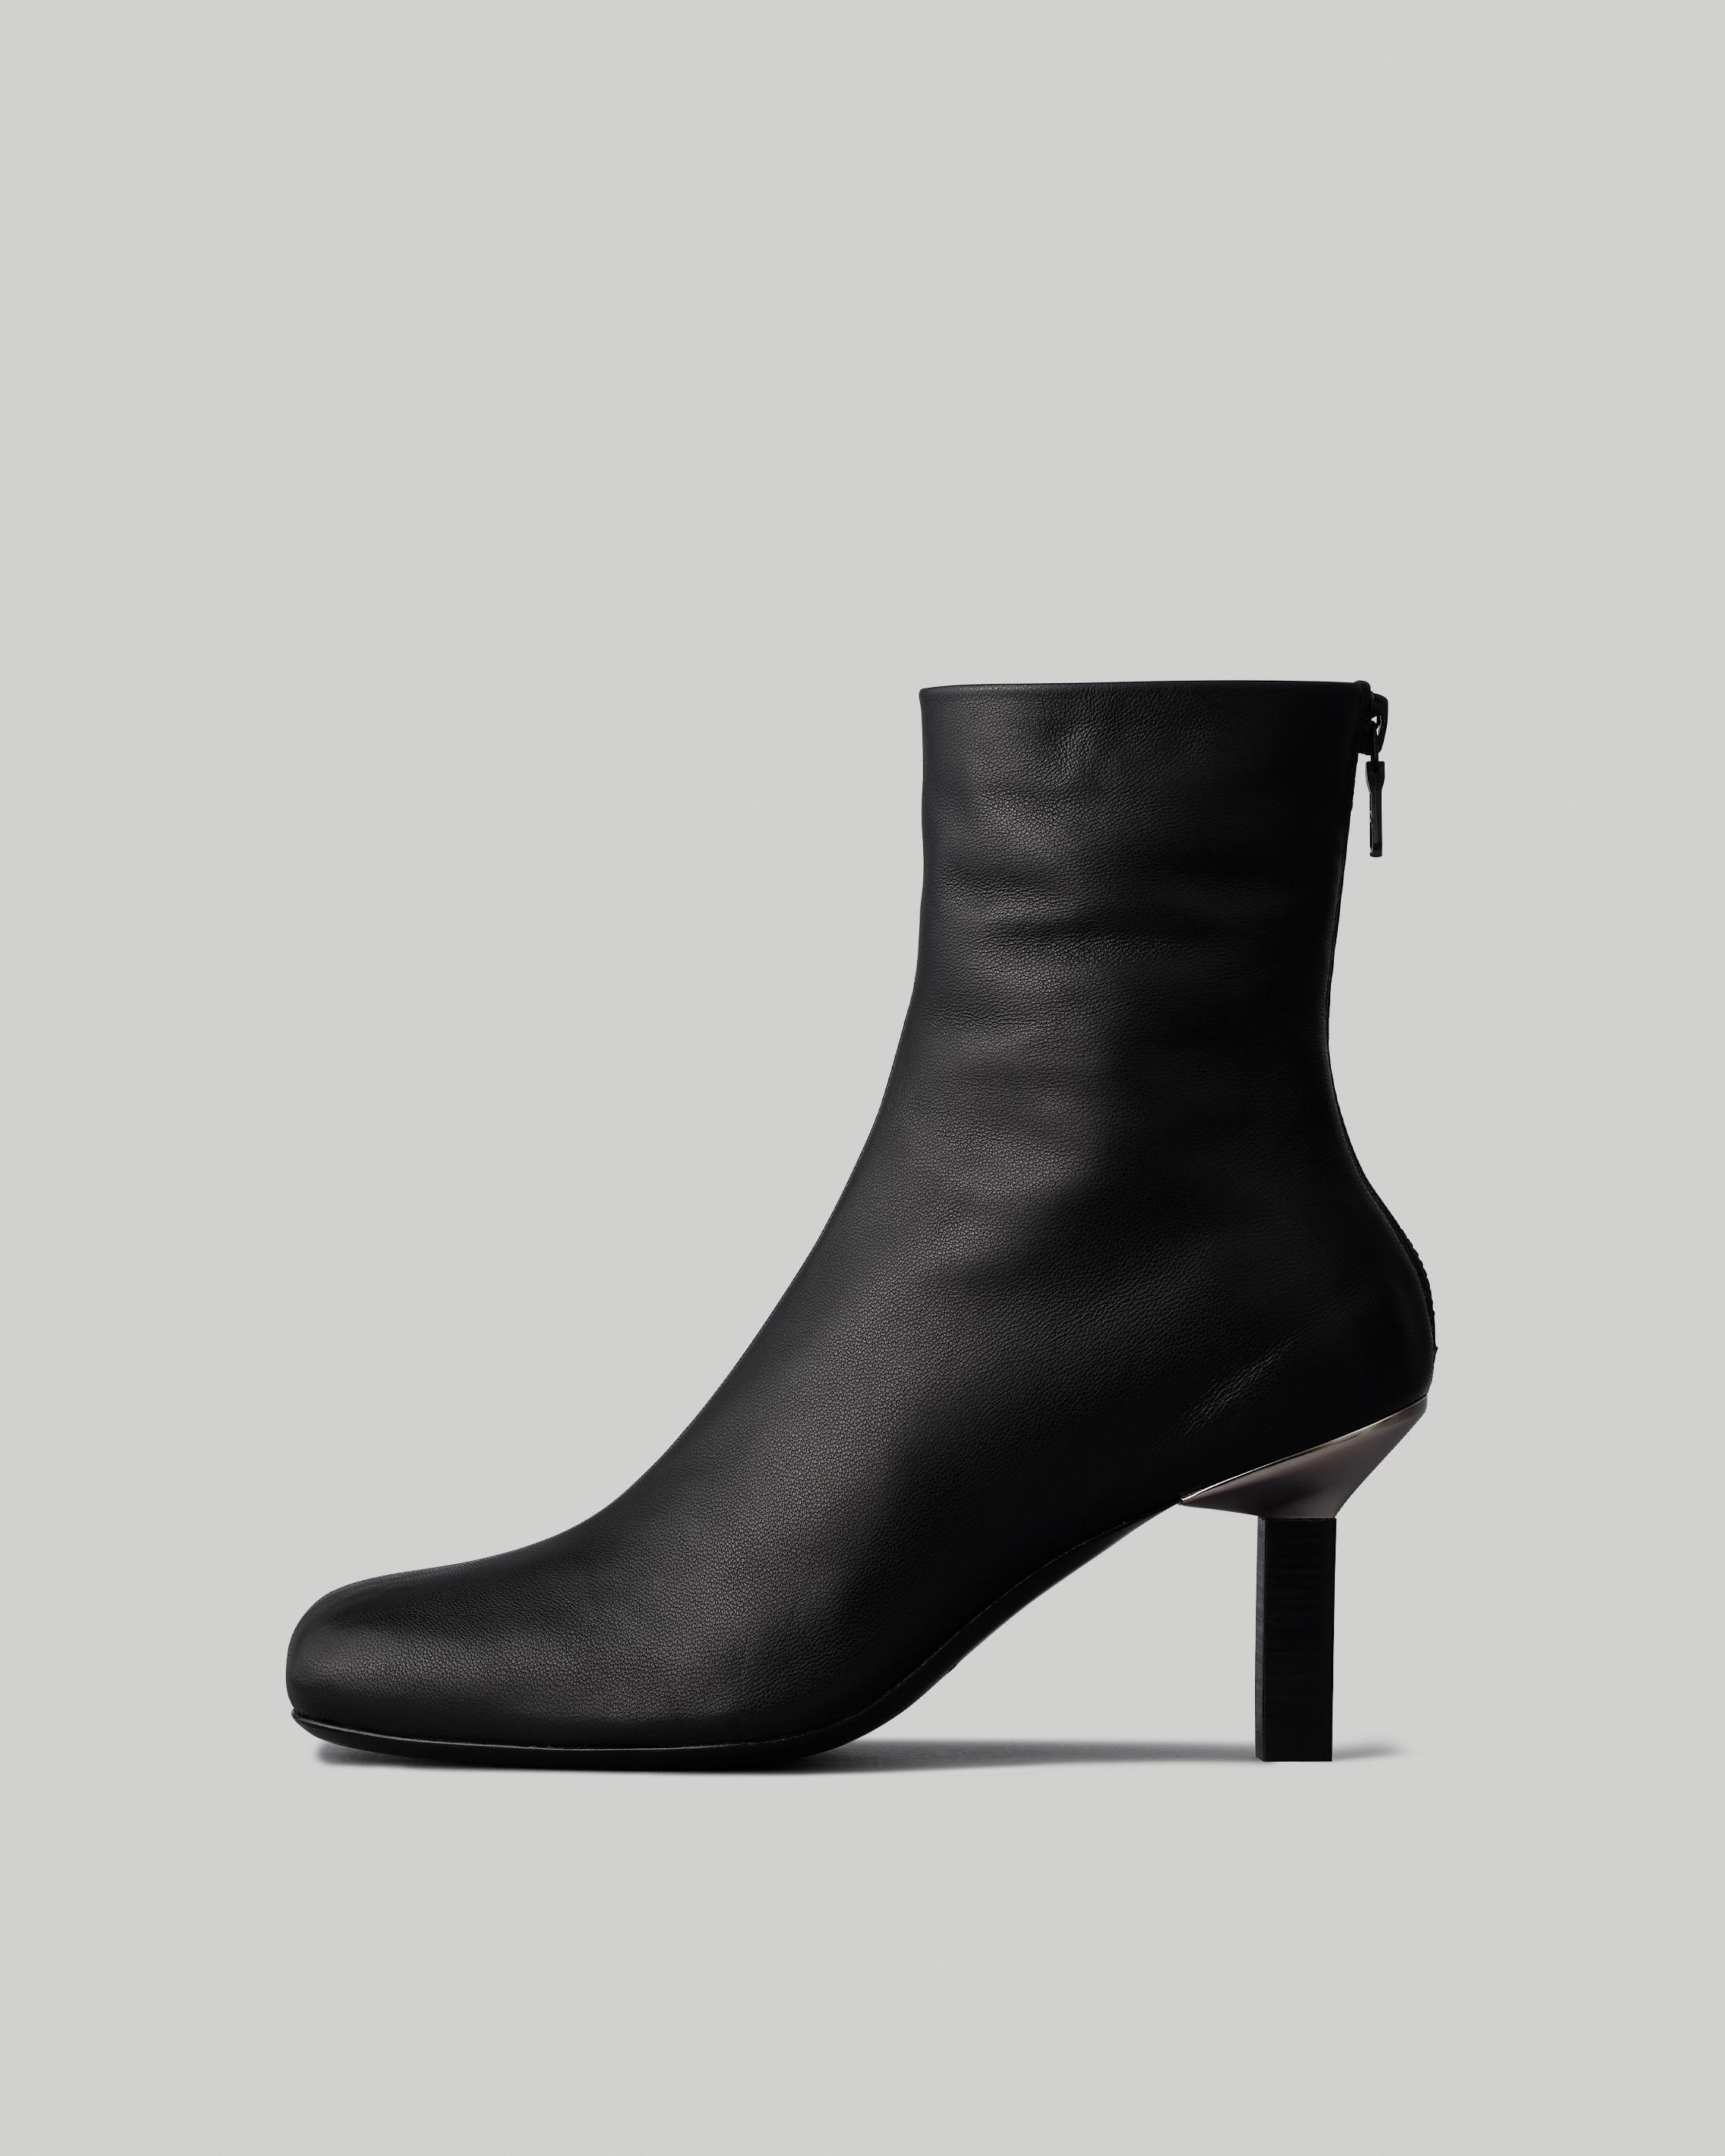 Joey Boot - Leather
Heeled Ankle Boot - 1